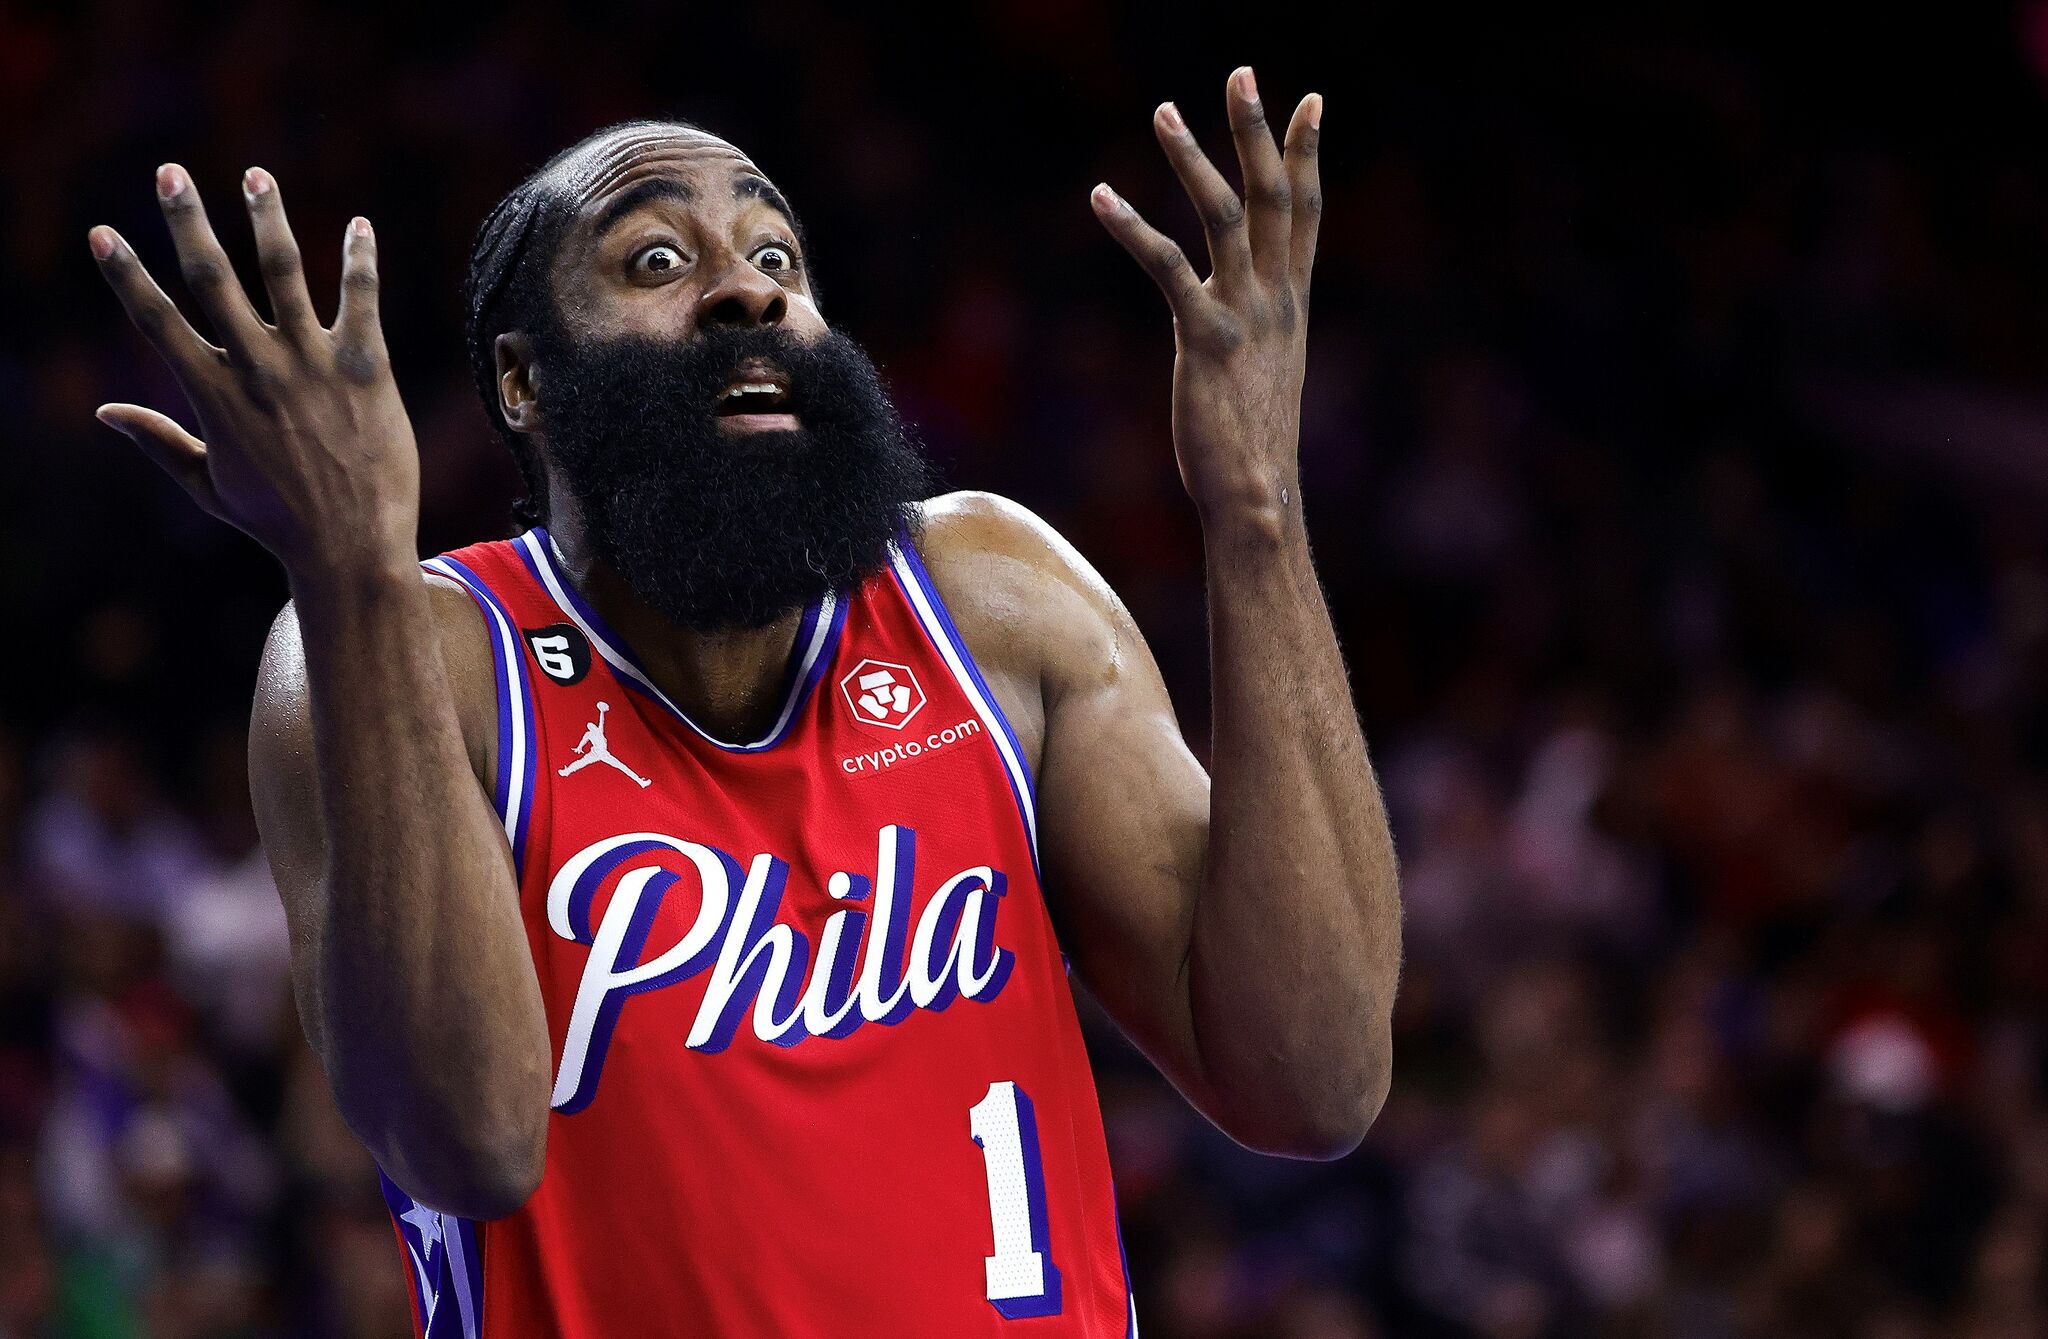 James Harden will get 'legit chance' with Nets